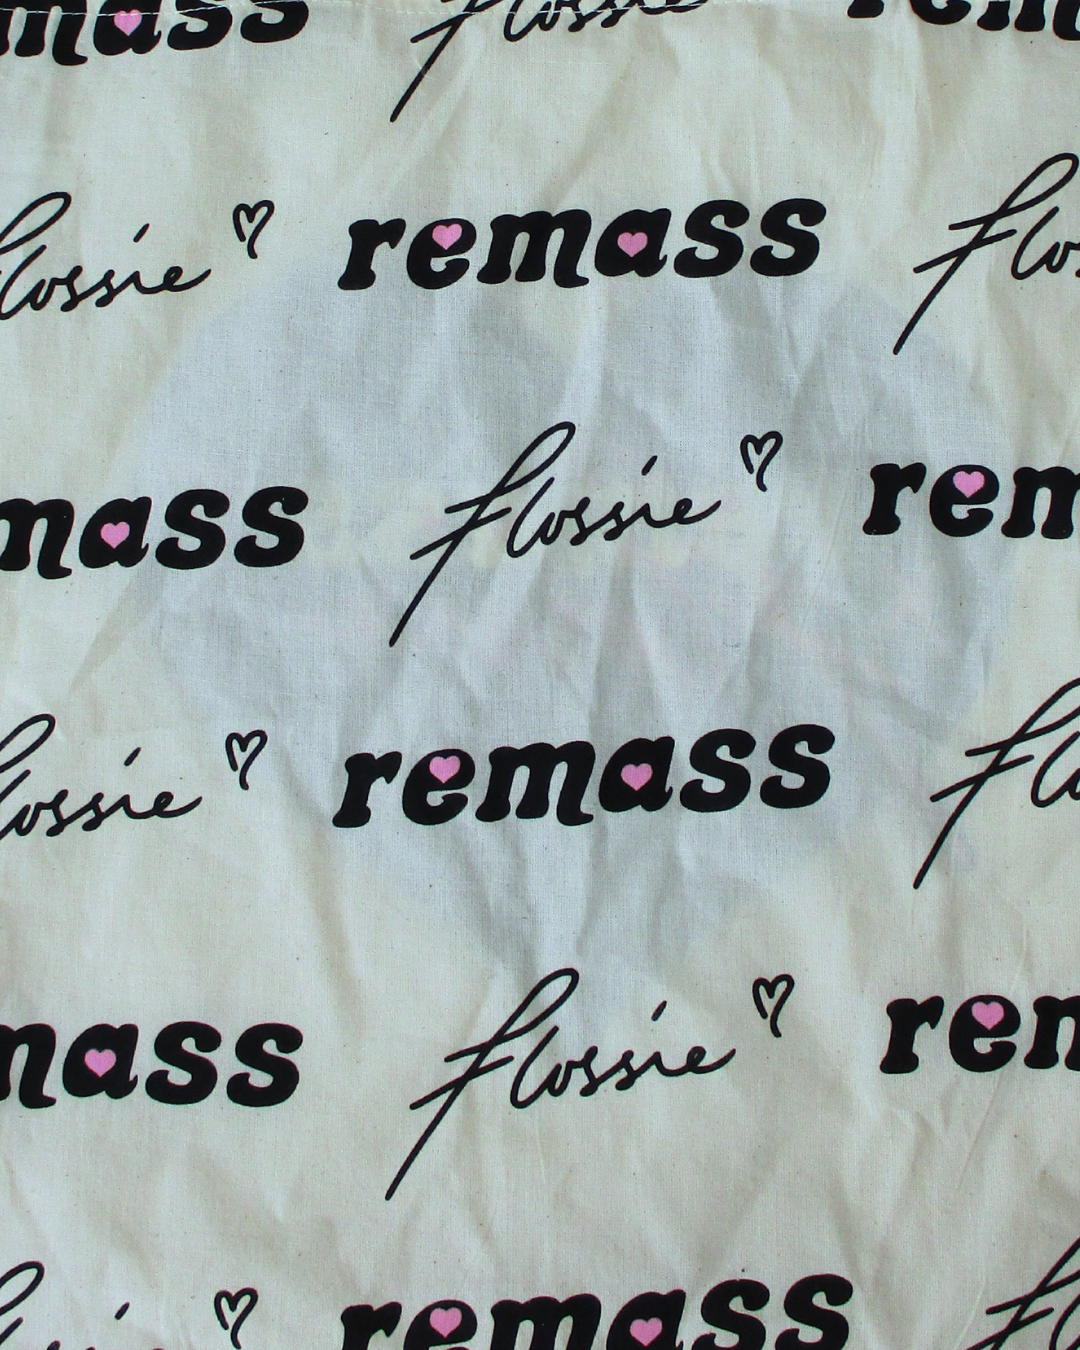 remass x flossie: tote bag